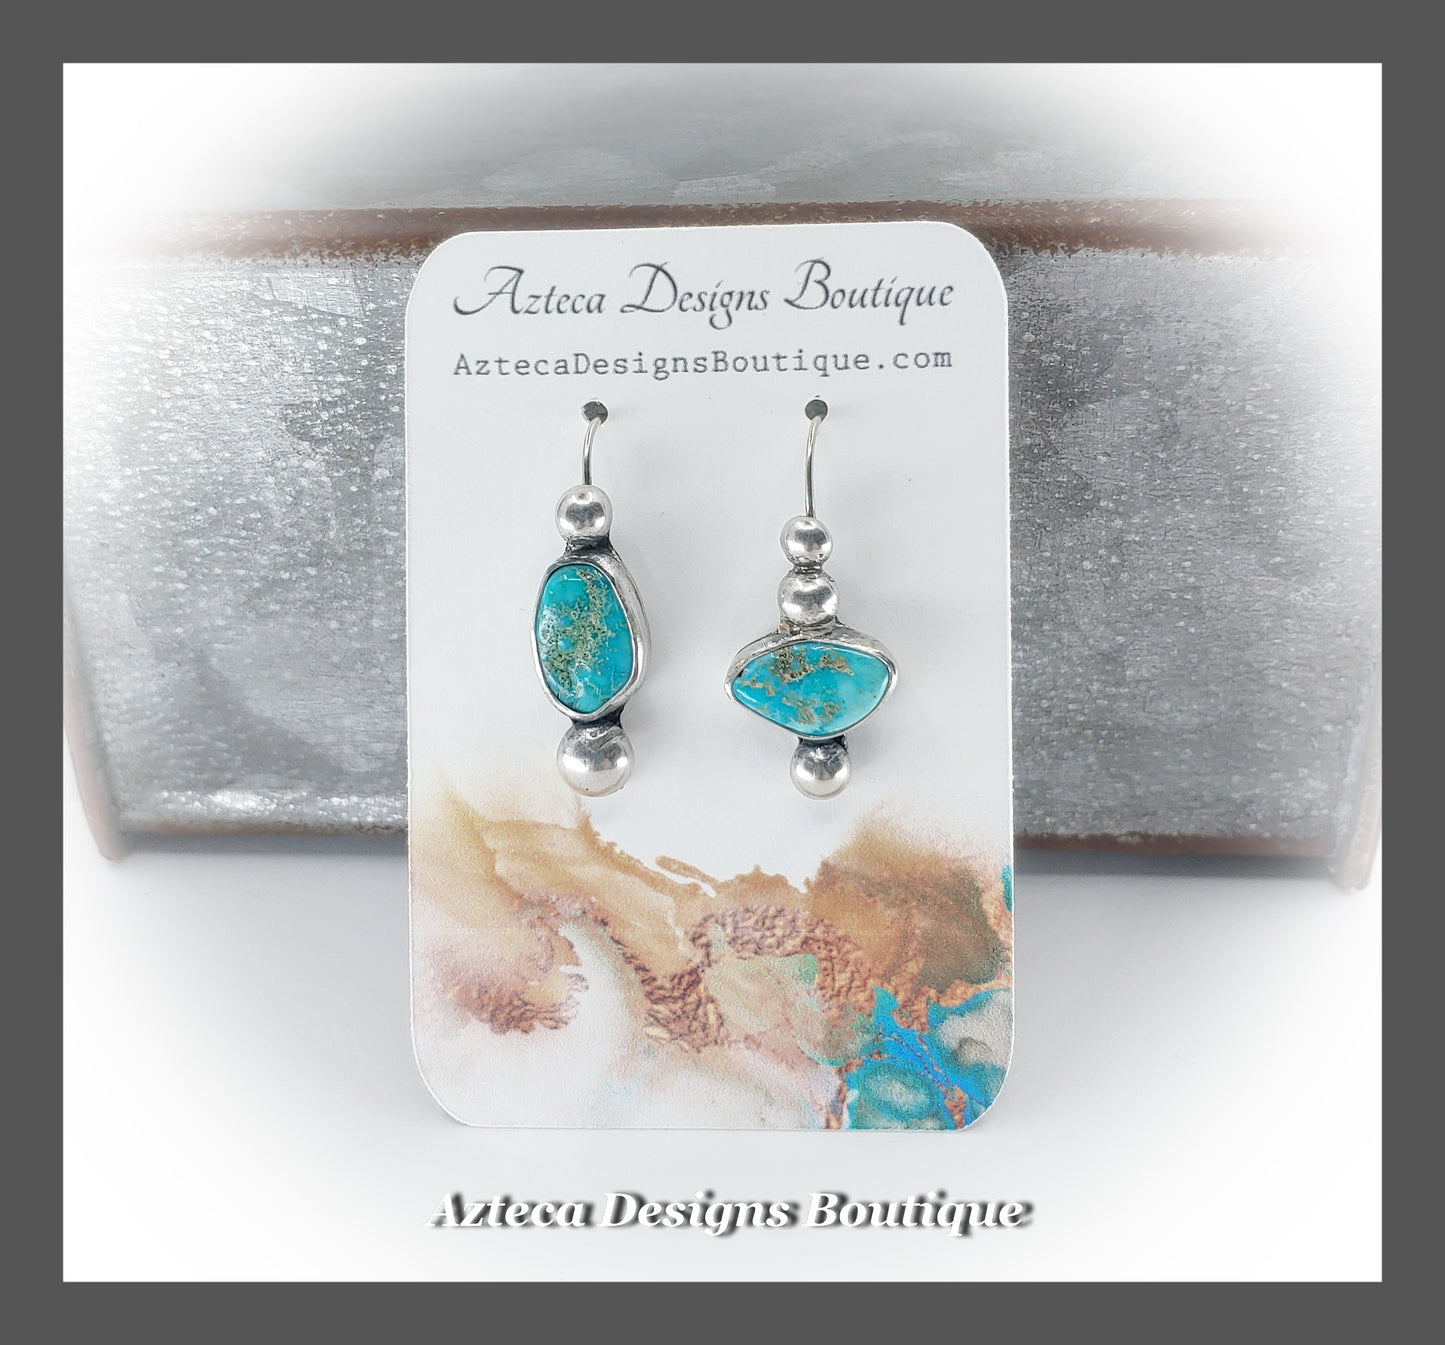 Arizona Turquoise Nuggets+Hand Fabricated Silver+Asymmetrical Earrings+Embracing Individuality